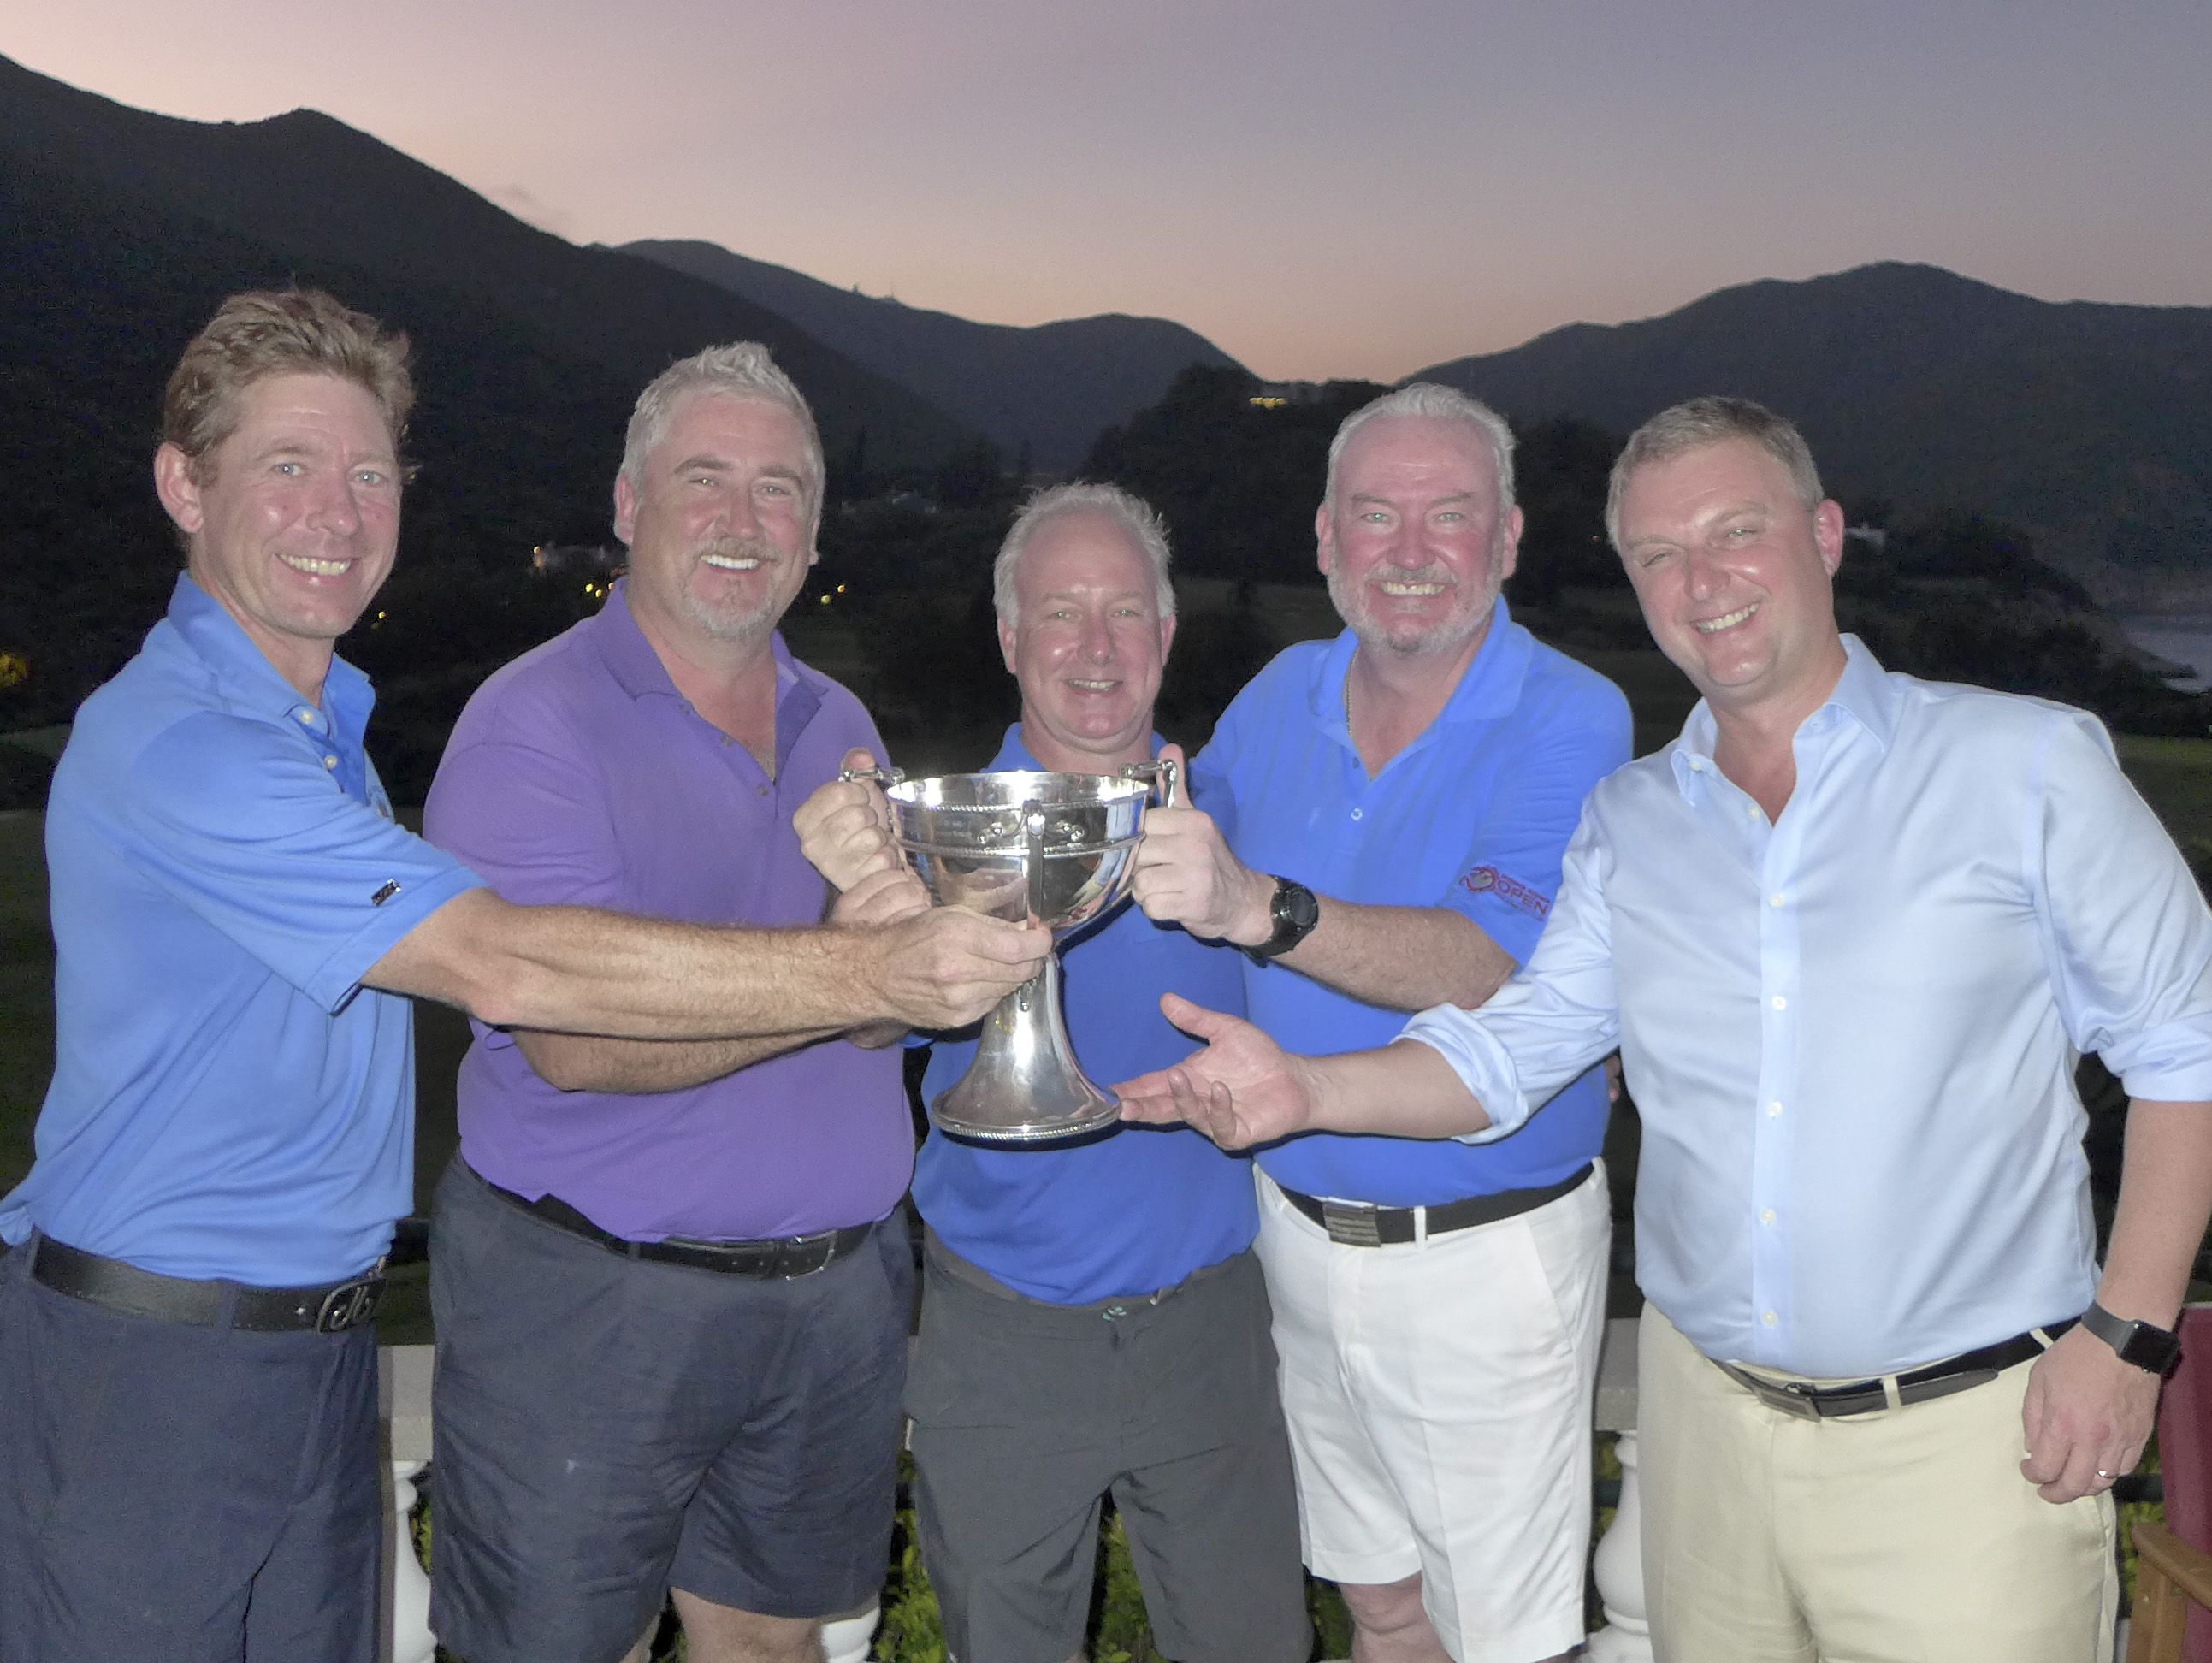 The victorious Scotland team (L to R) Derek Crampton, Paul Curran, Alan McTaggart and Charles McLaughlin being presented with the Shanghai Cup by Mark Bromhead